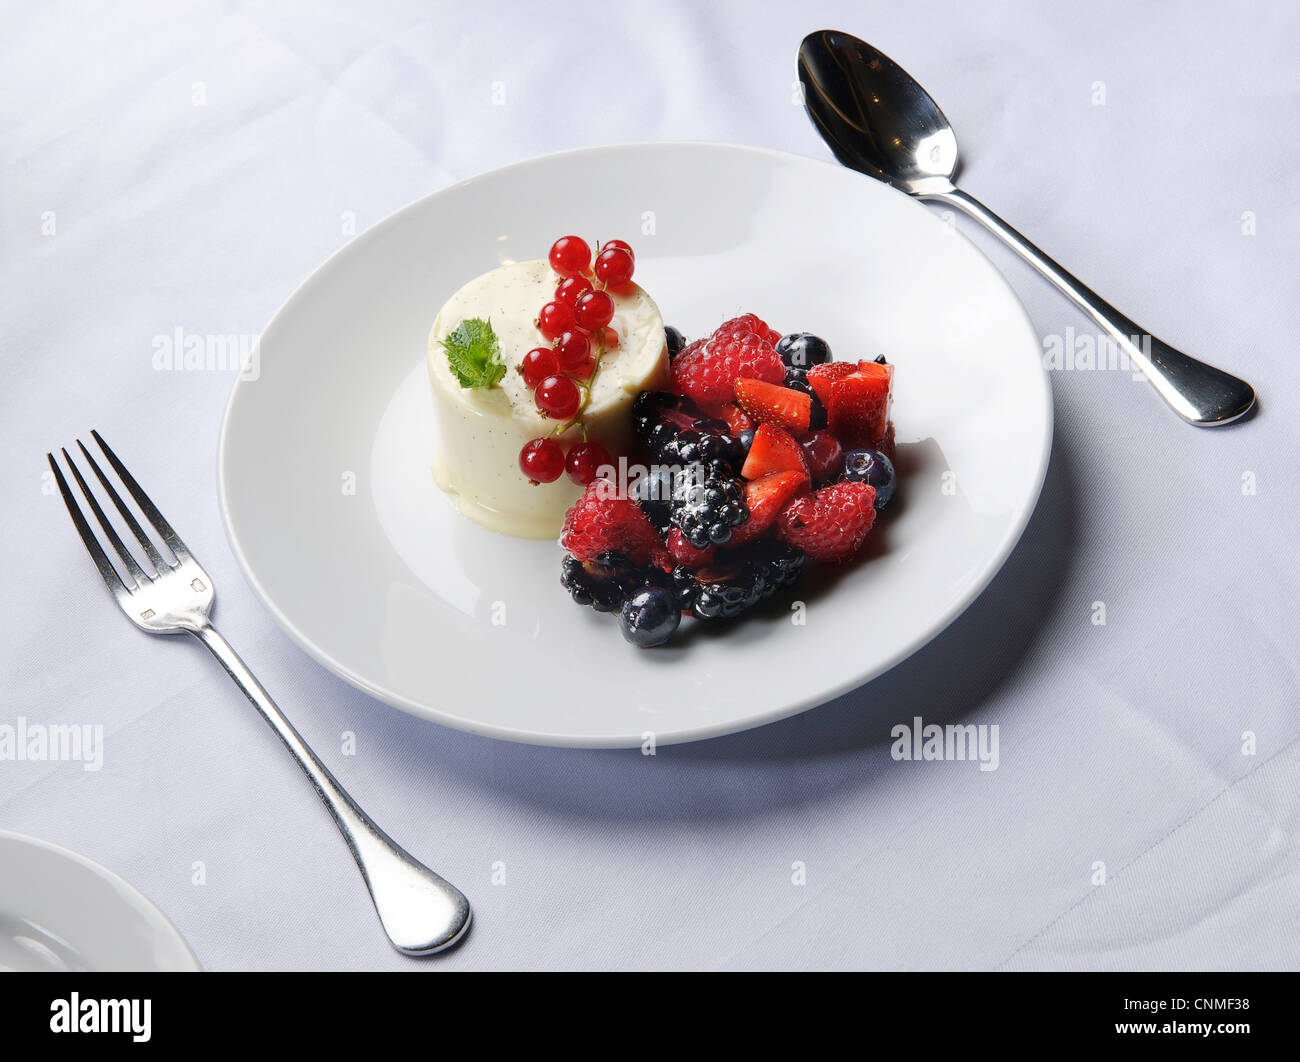 fruit pudding dessert blackberry, blueberry, raspberry red currants and strawberries on white tablecloth on restaurant table Stock Photo